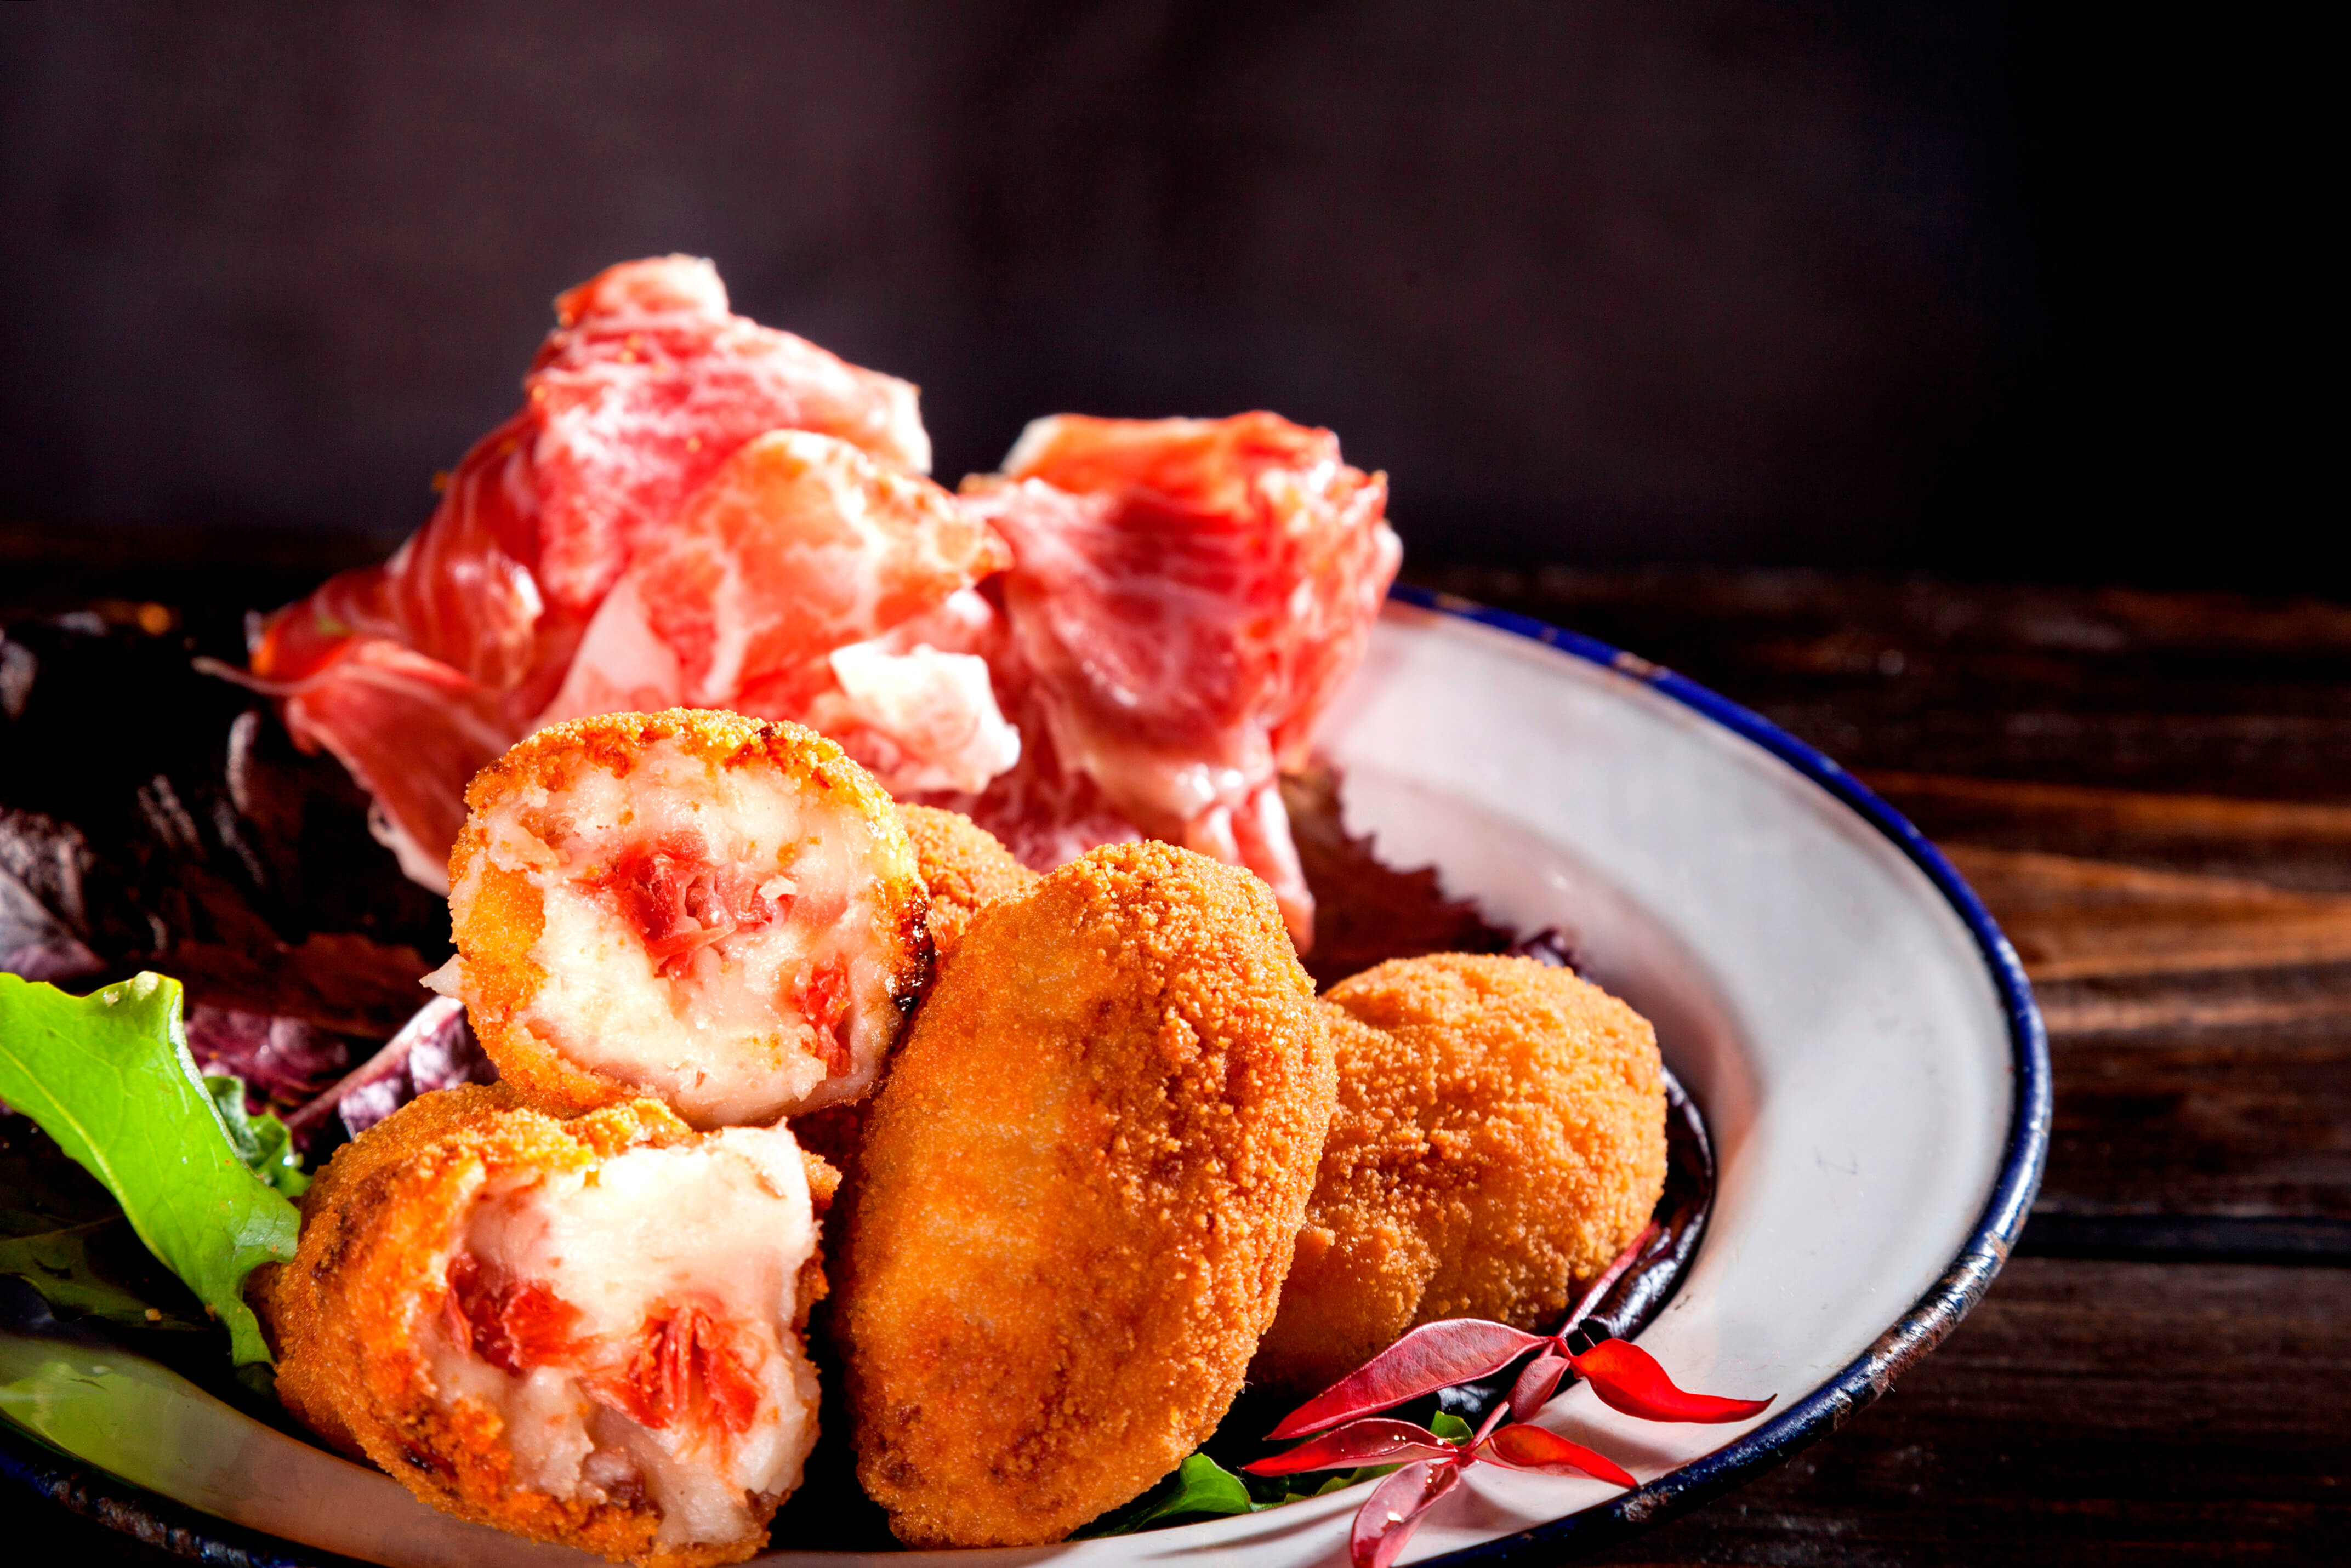 croquetas can be filled with anything and are one of our healthy tapas recipes